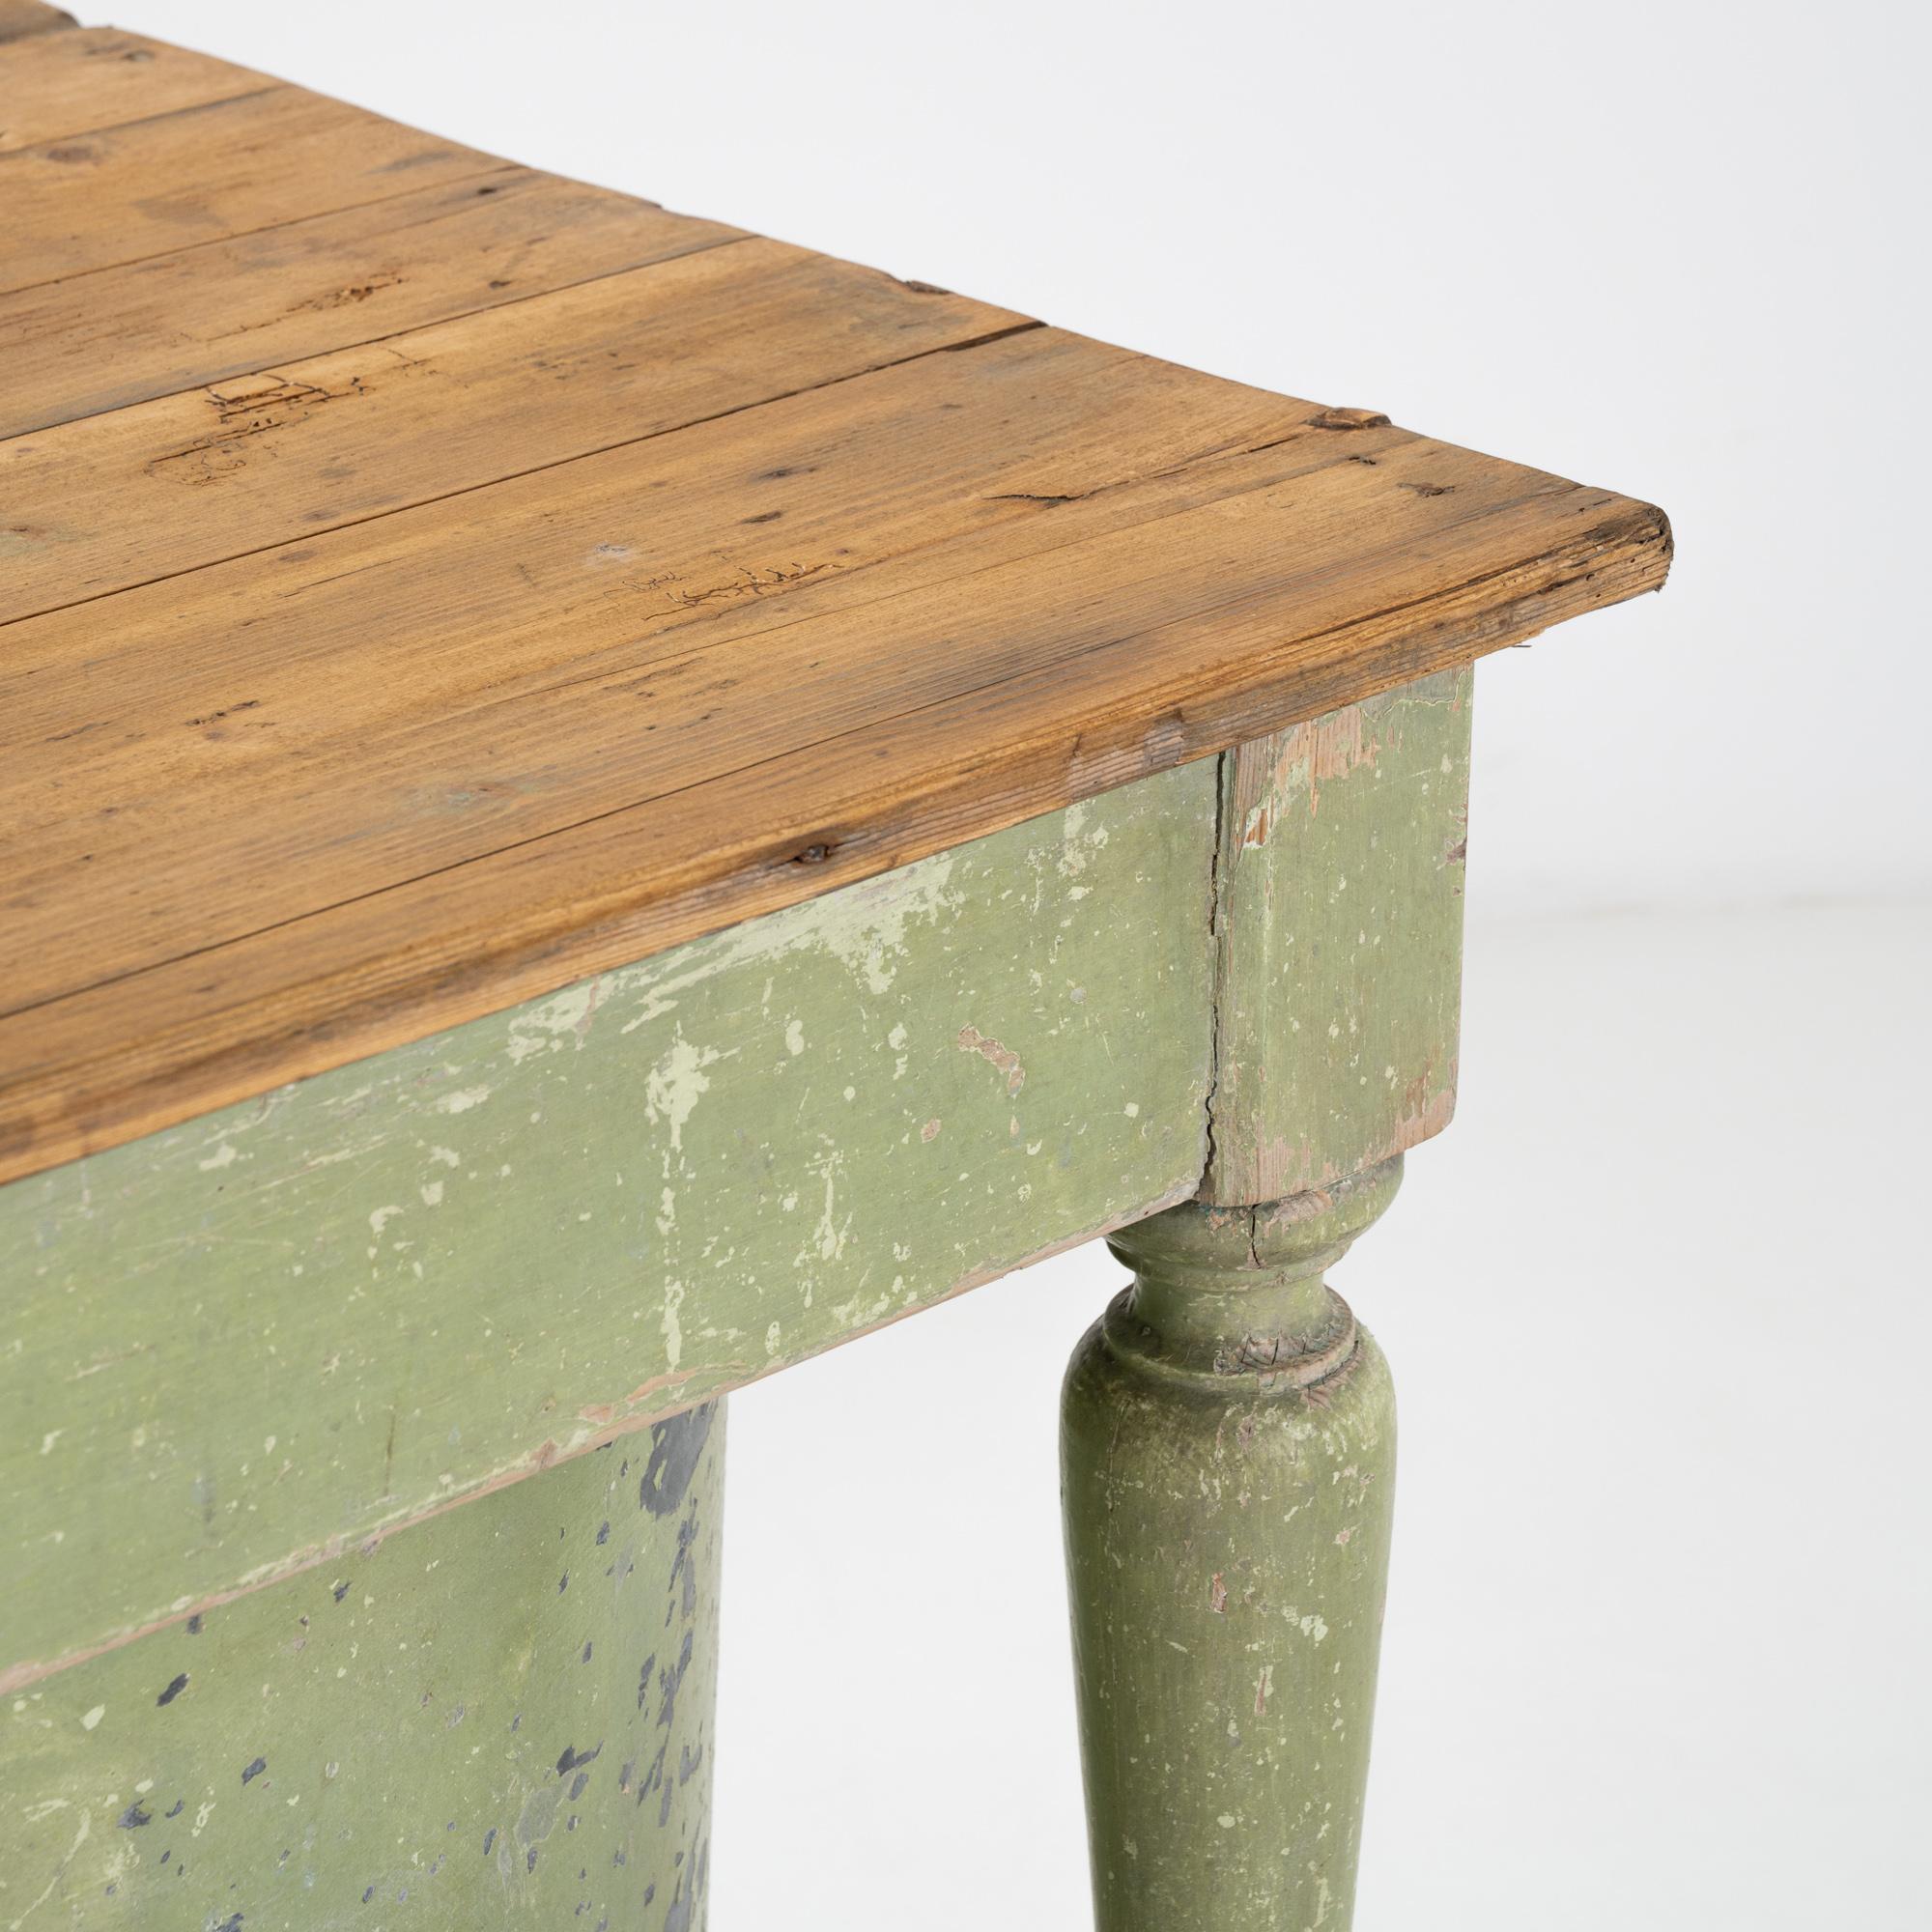 19th Century French Wooden Table with Zinc Bath 6